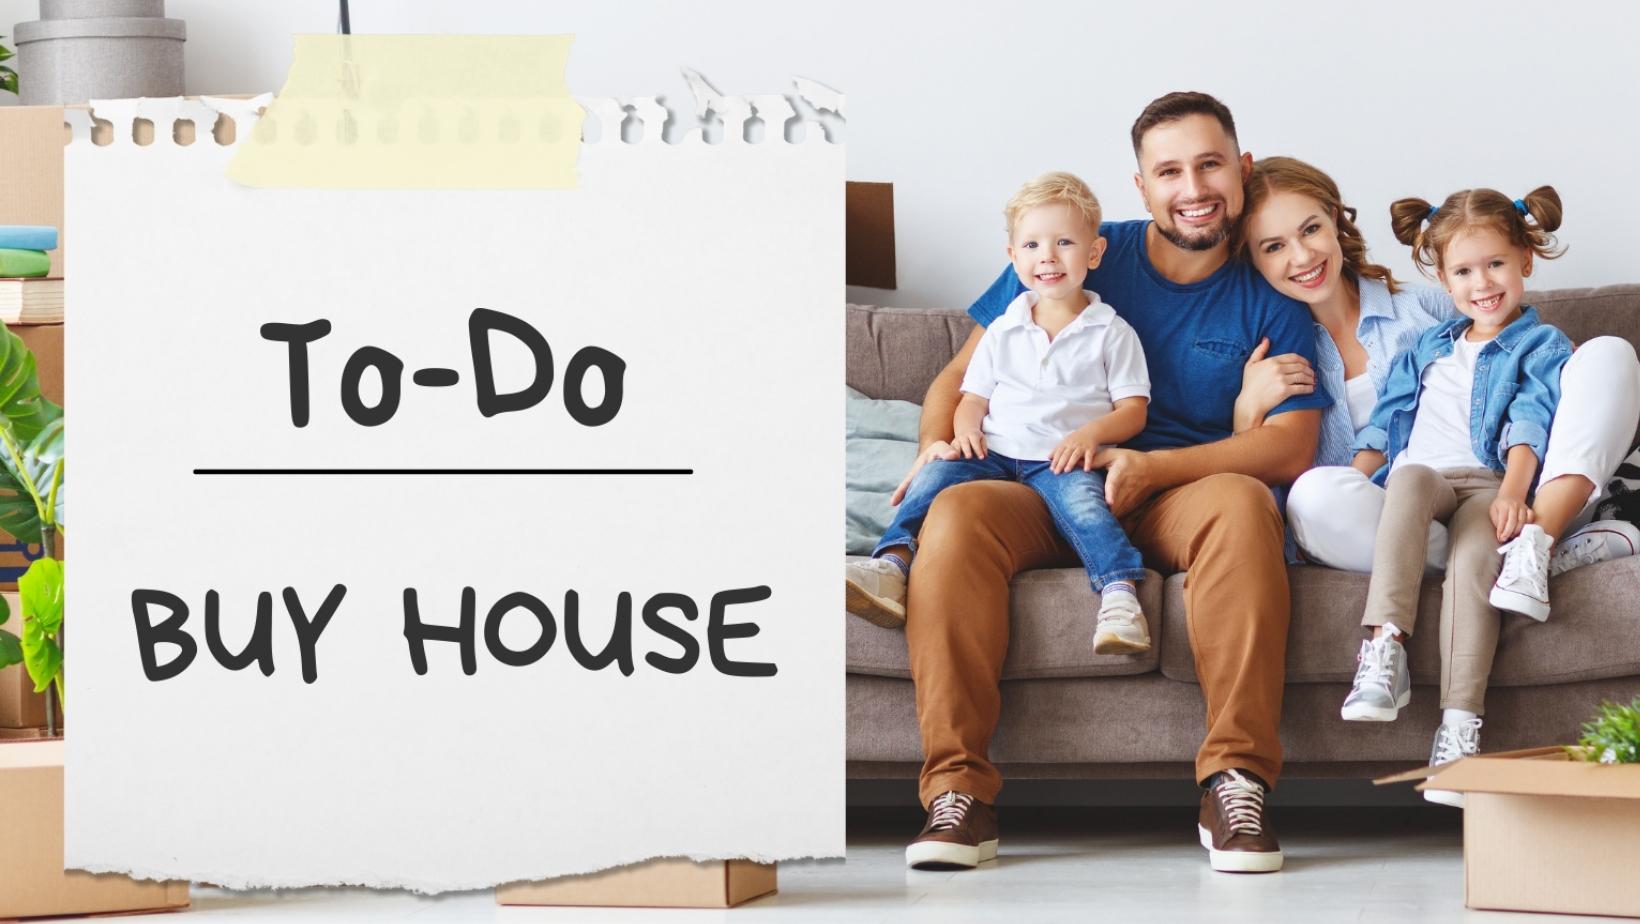 The photo contains the image of two adults and two children sitting on a couch. On top of the image is a piece of paper with a piece of tape. The text on the paper reads "To do: Buy House."